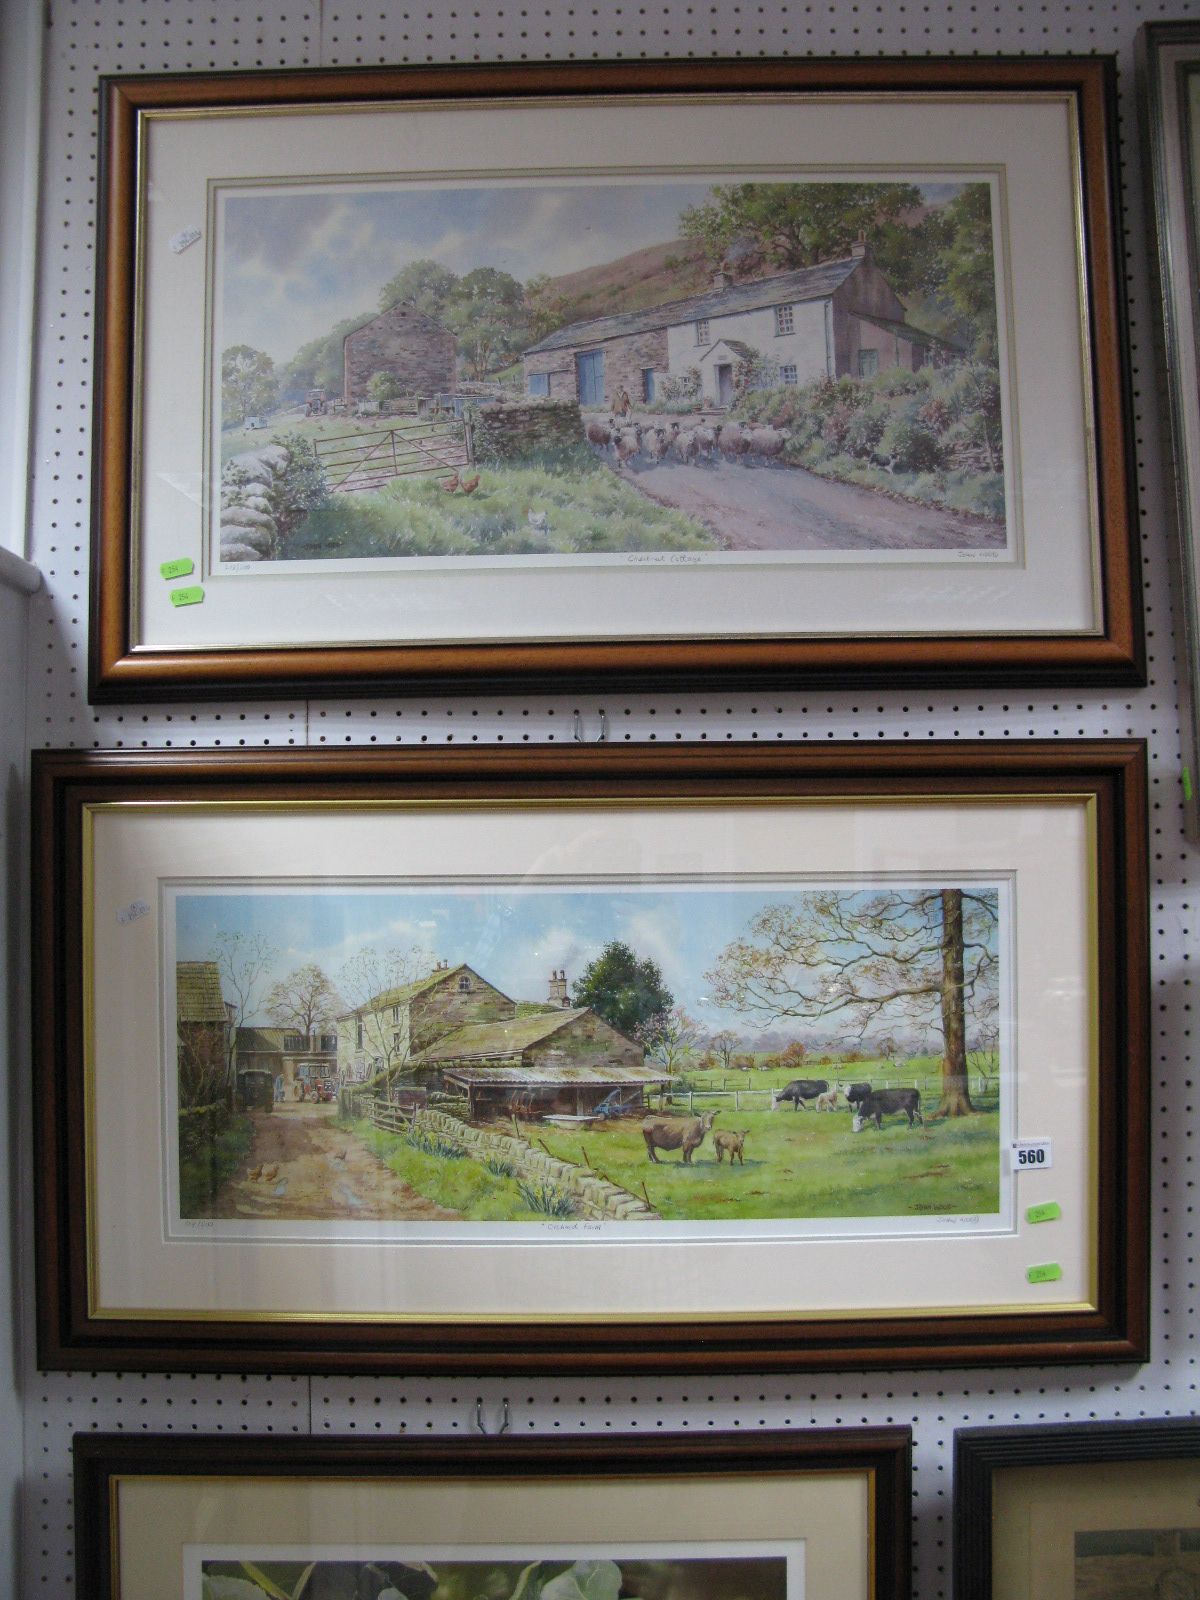 John Wood, two limited edition of 500 colour prints, "Orchard Farm" and "Chestnut Cottage", approx